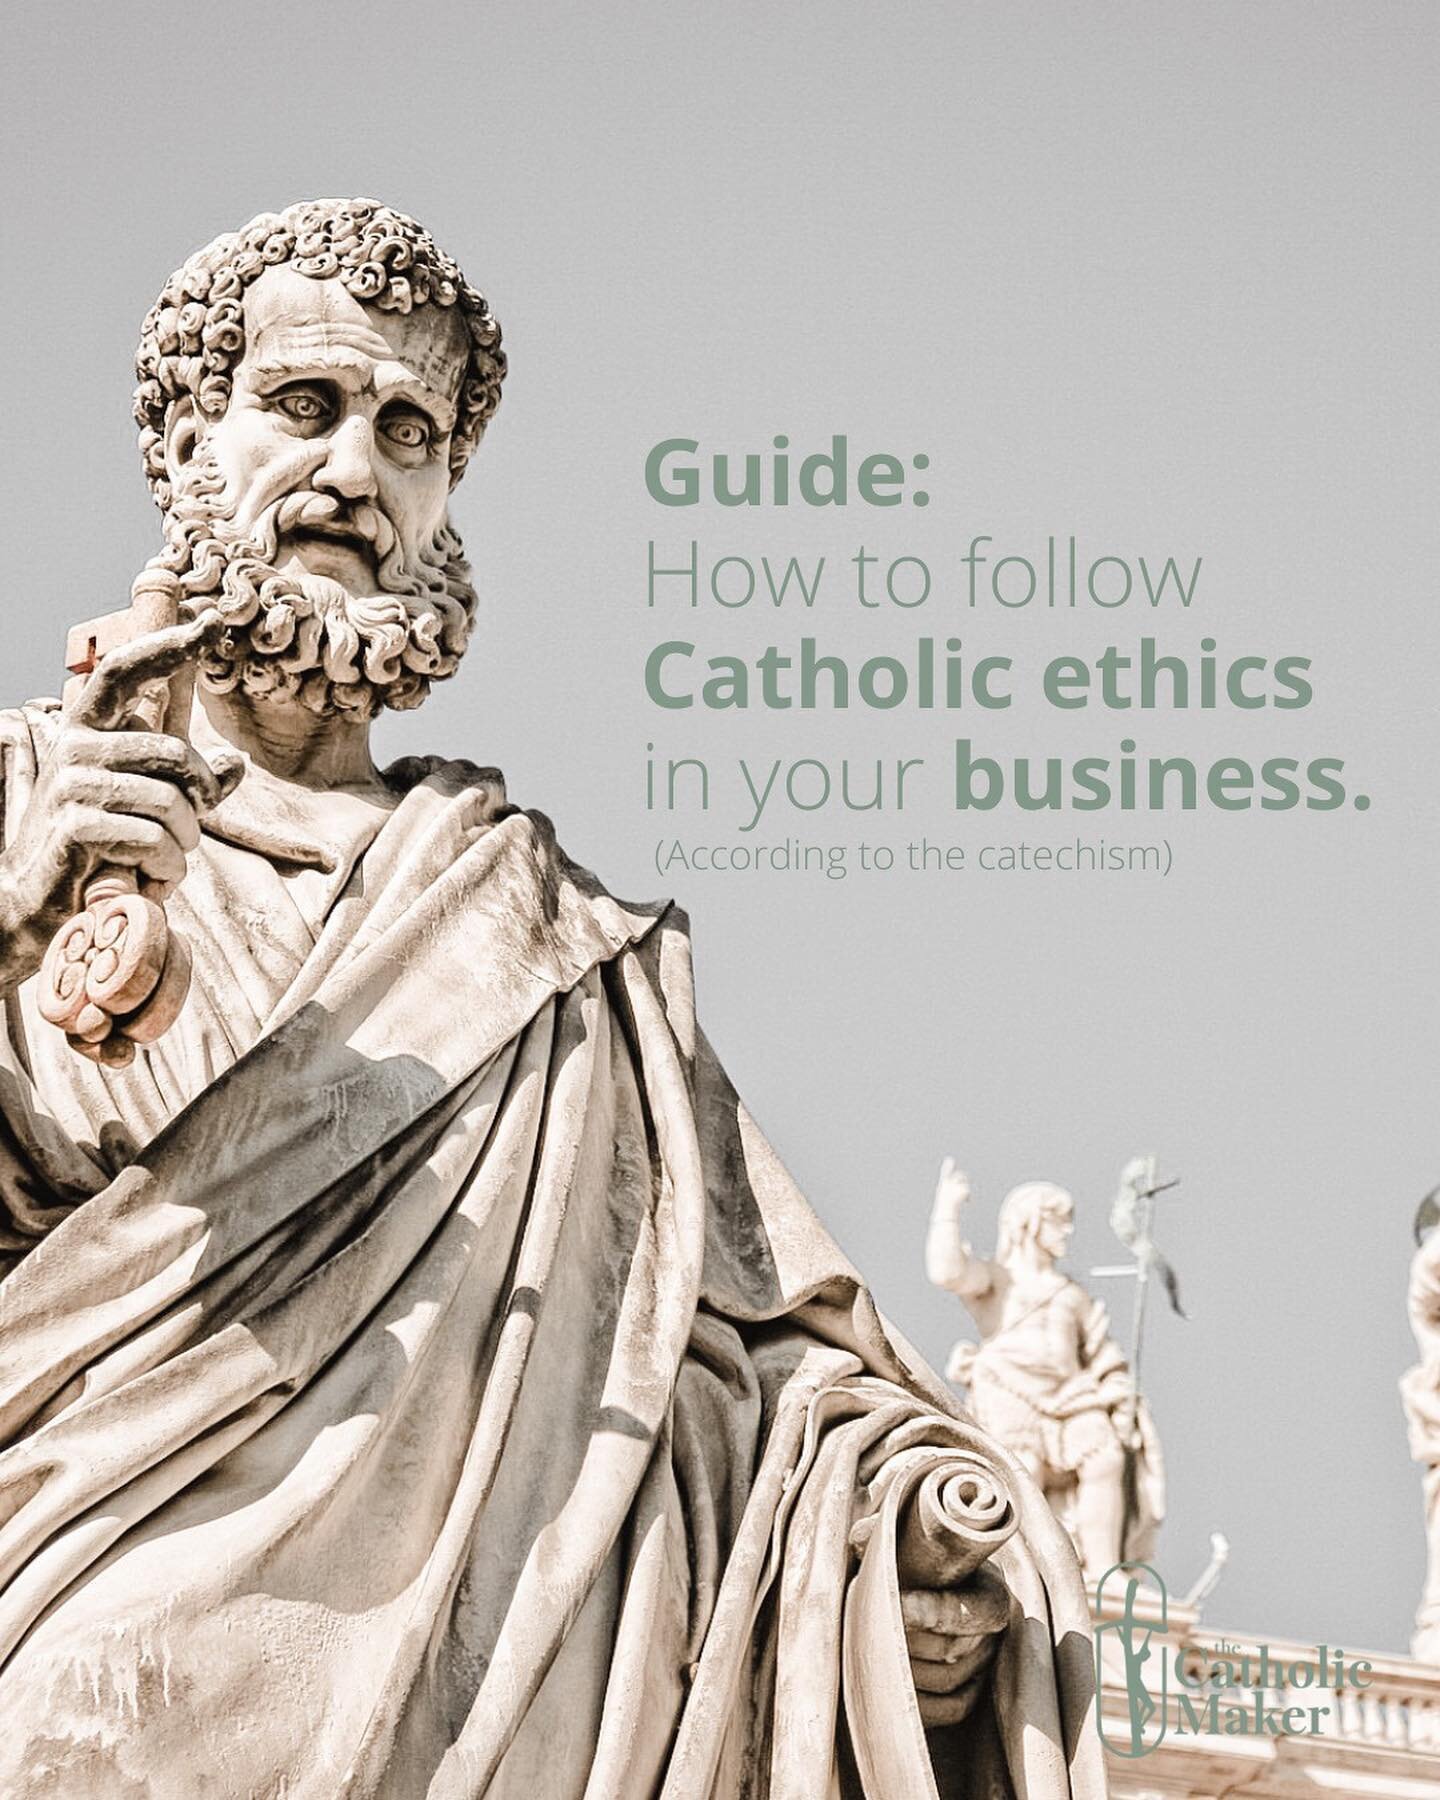 Does your business follow the Catholic principles?
.
#catholicbusinessowner #catholicbusiness #catholicshop